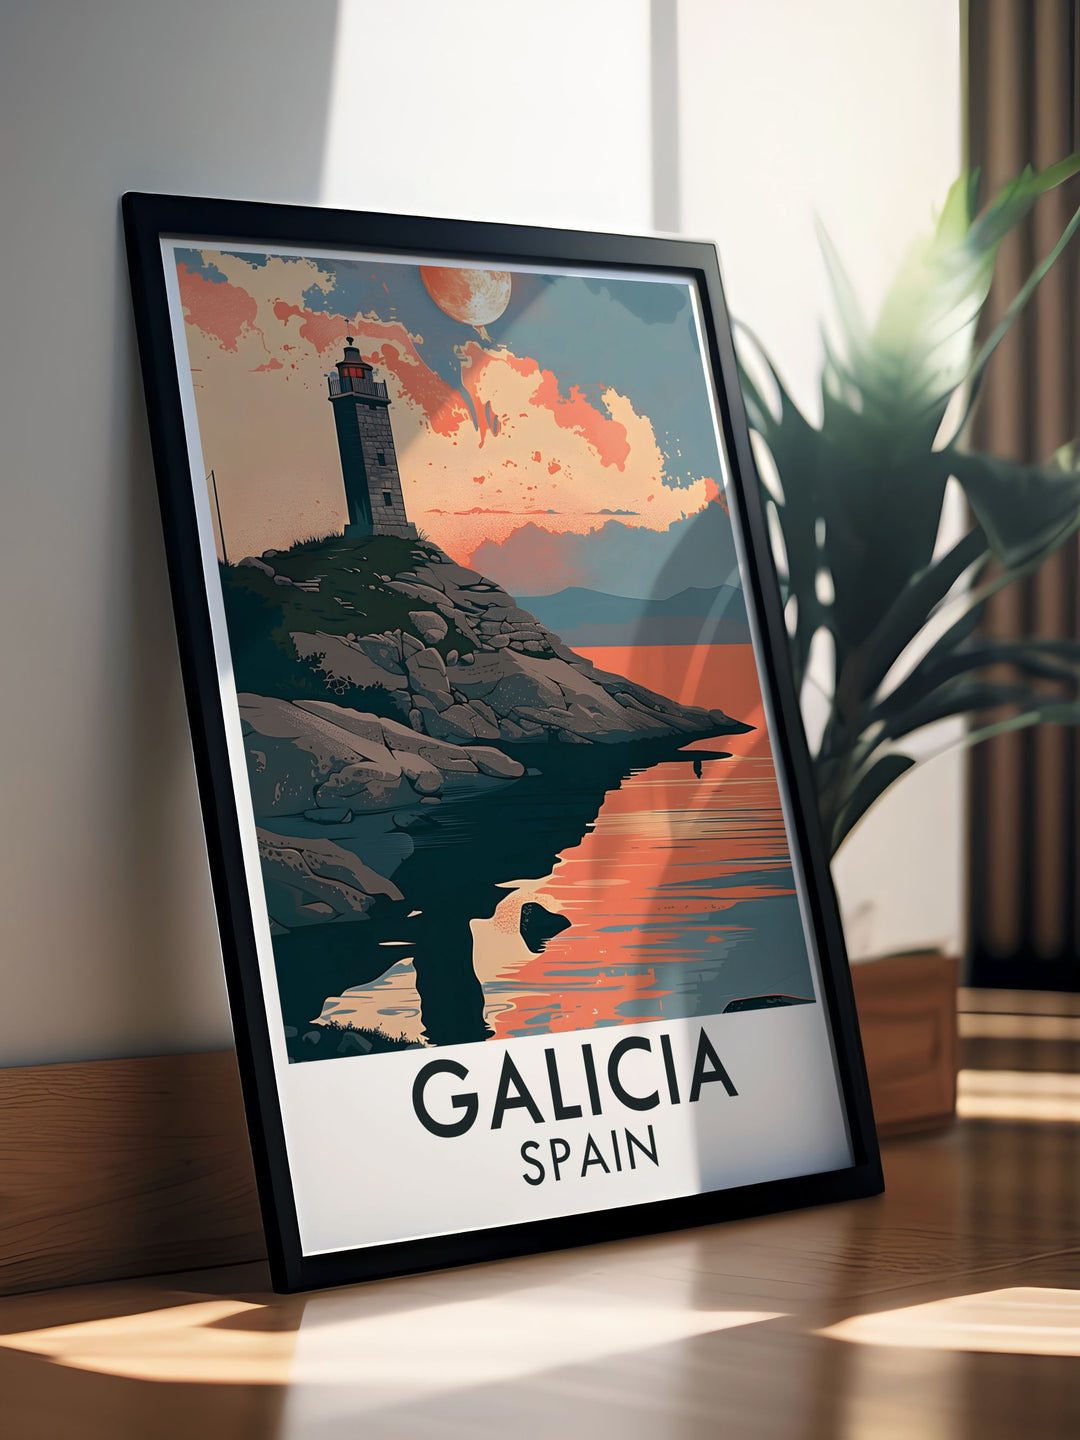 Illustrating the blend of history, architecture, and natural beauty, this print invites viewers to explore the Tower of Hercules.